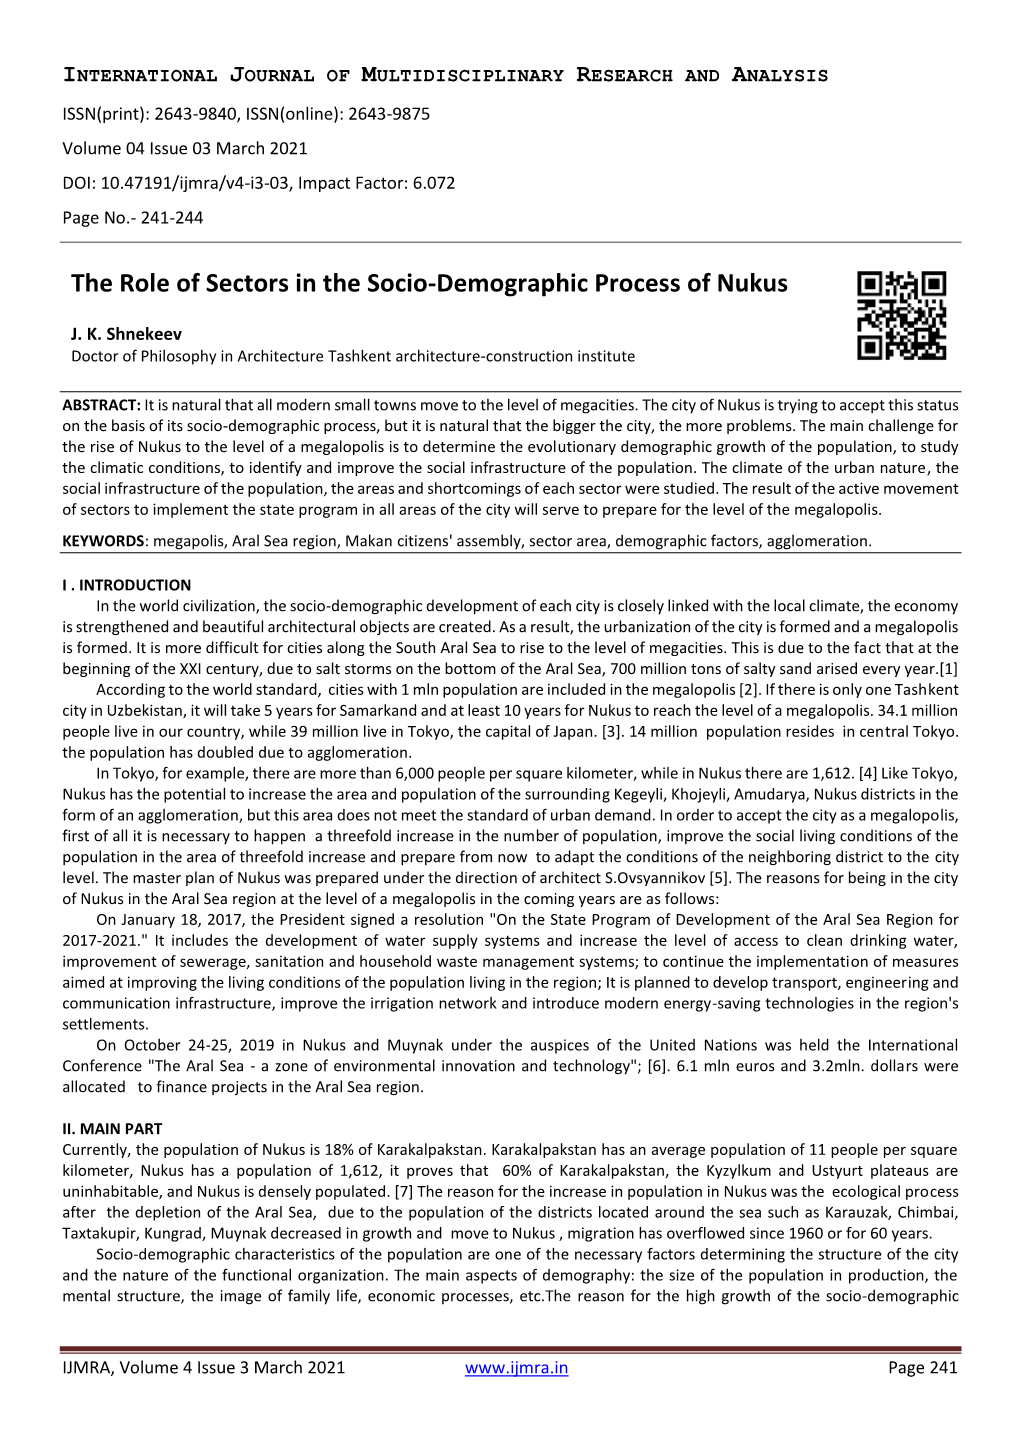 The Role of Sectors in the Socio-Demographic Process of Nukus